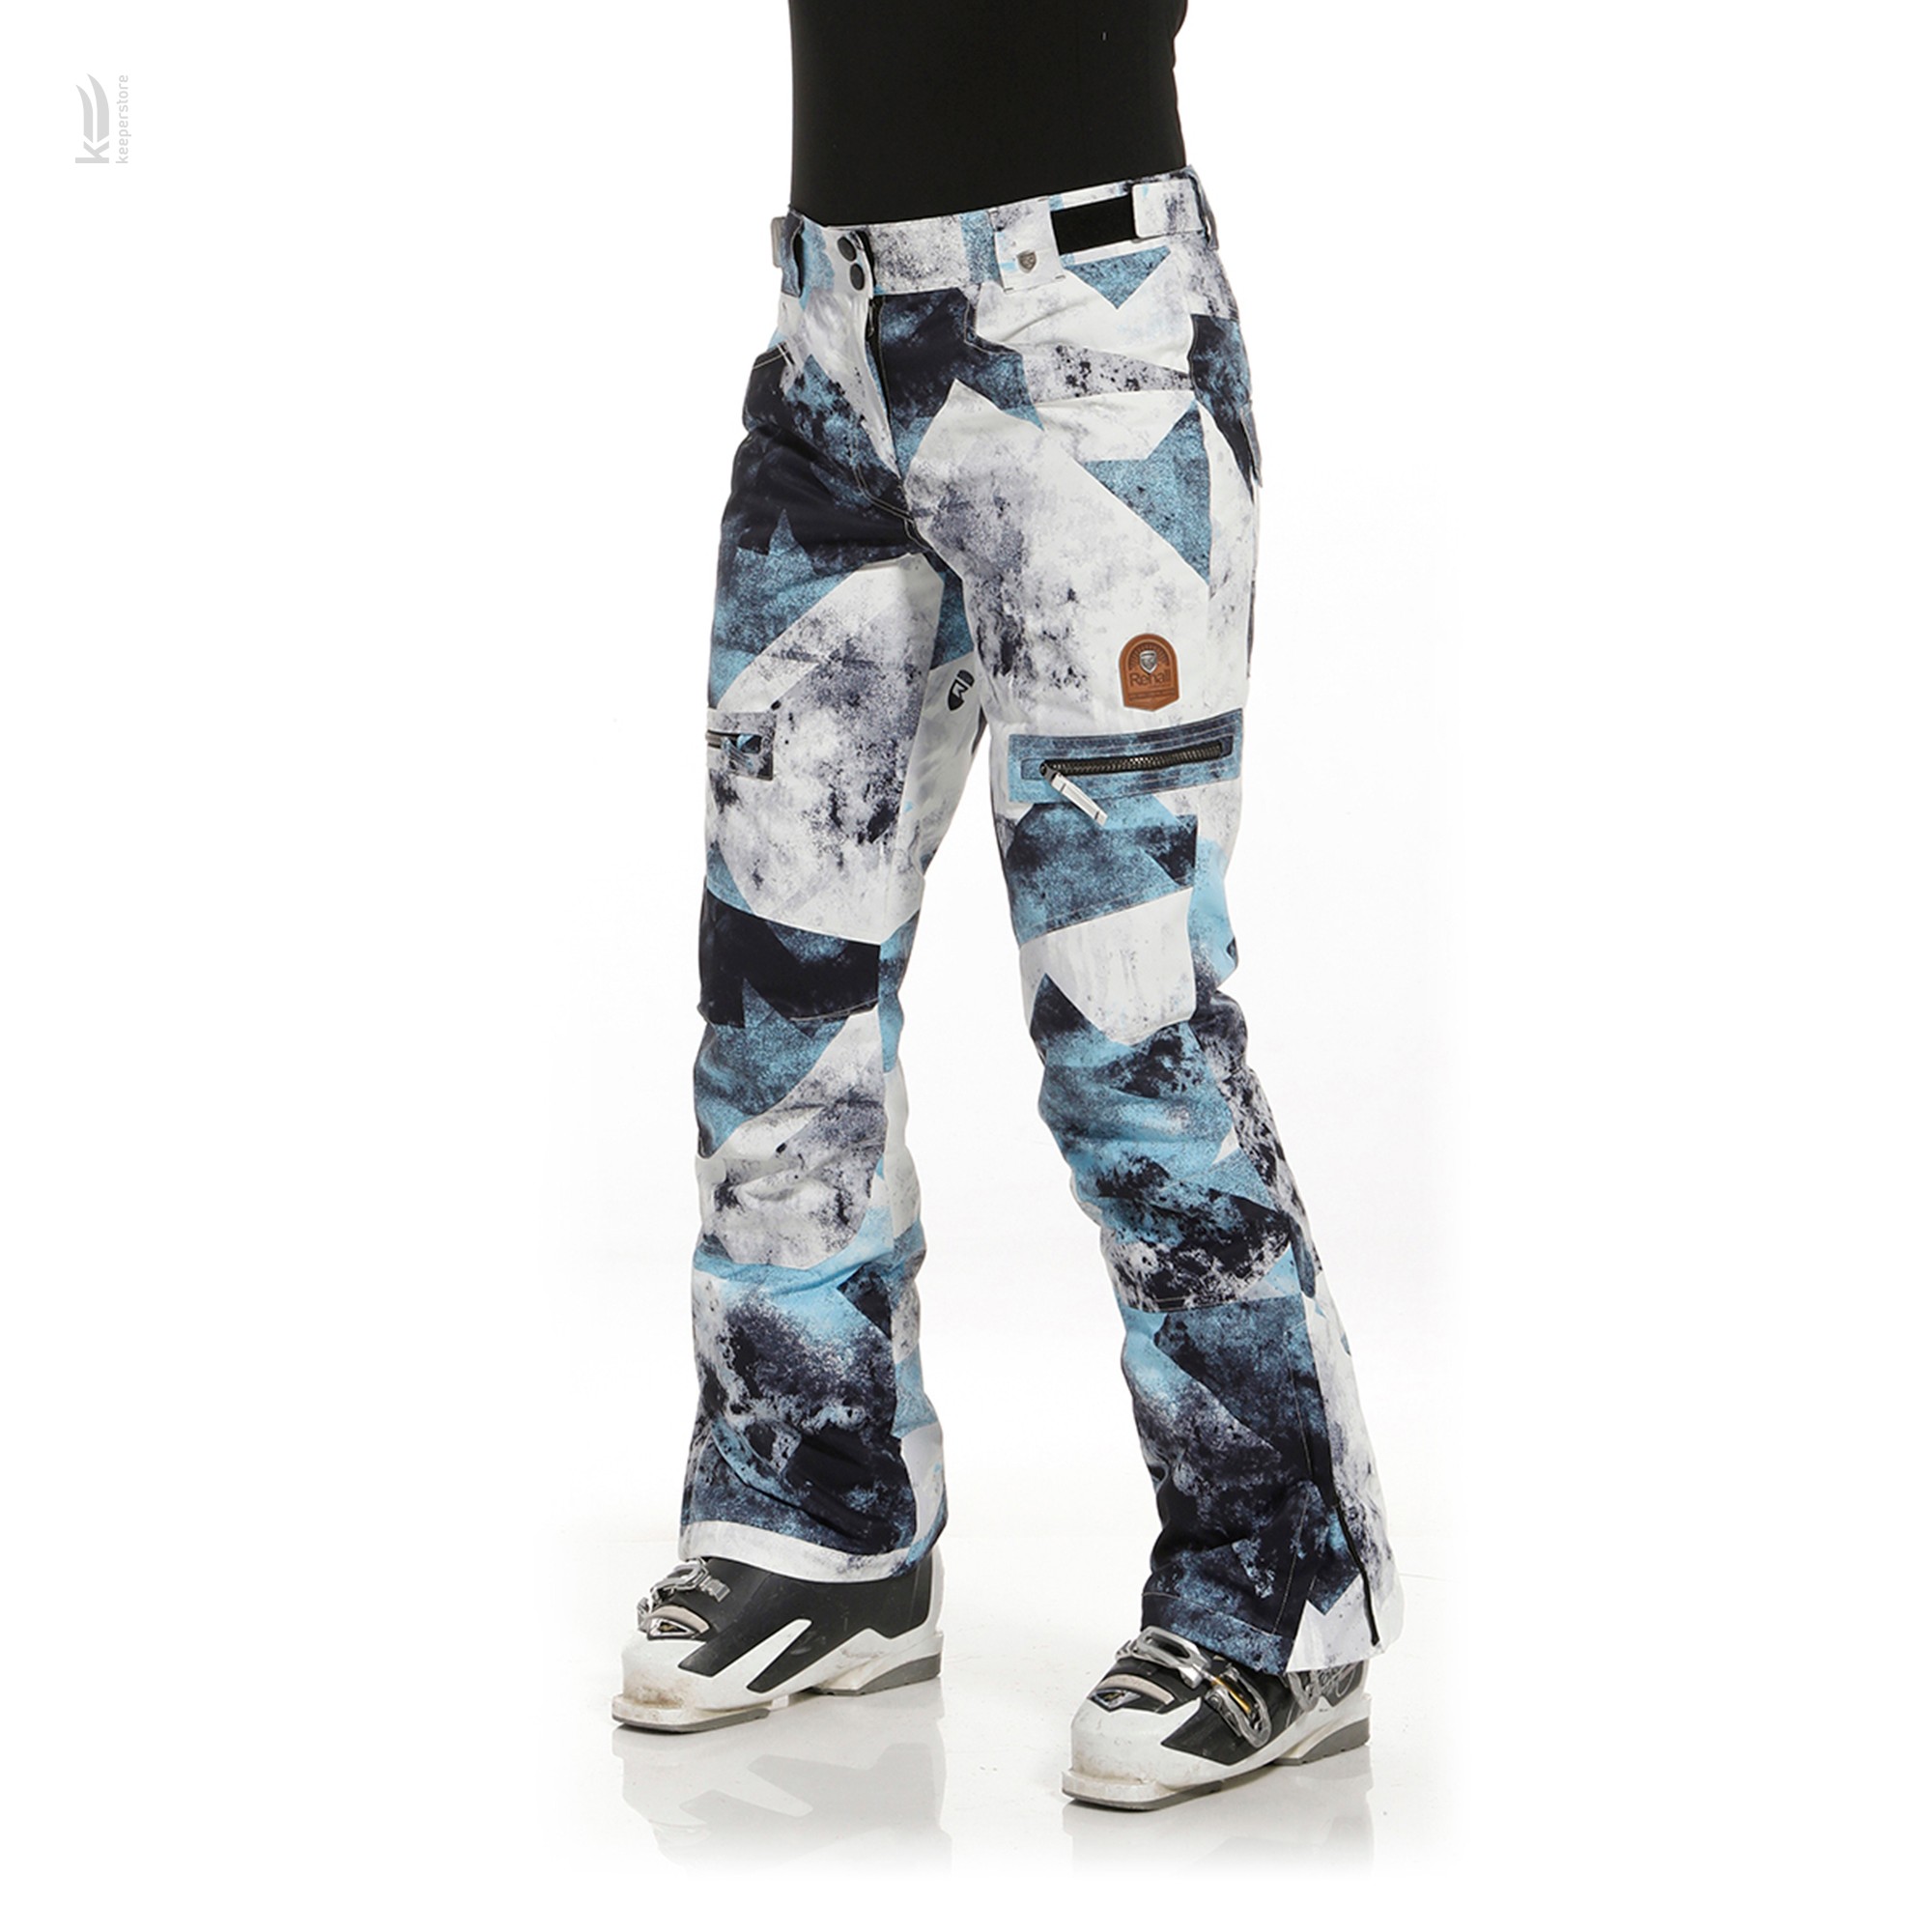 Rehall KEELY-R Snowpants Womens Graphic Mountains Blue-White (M)